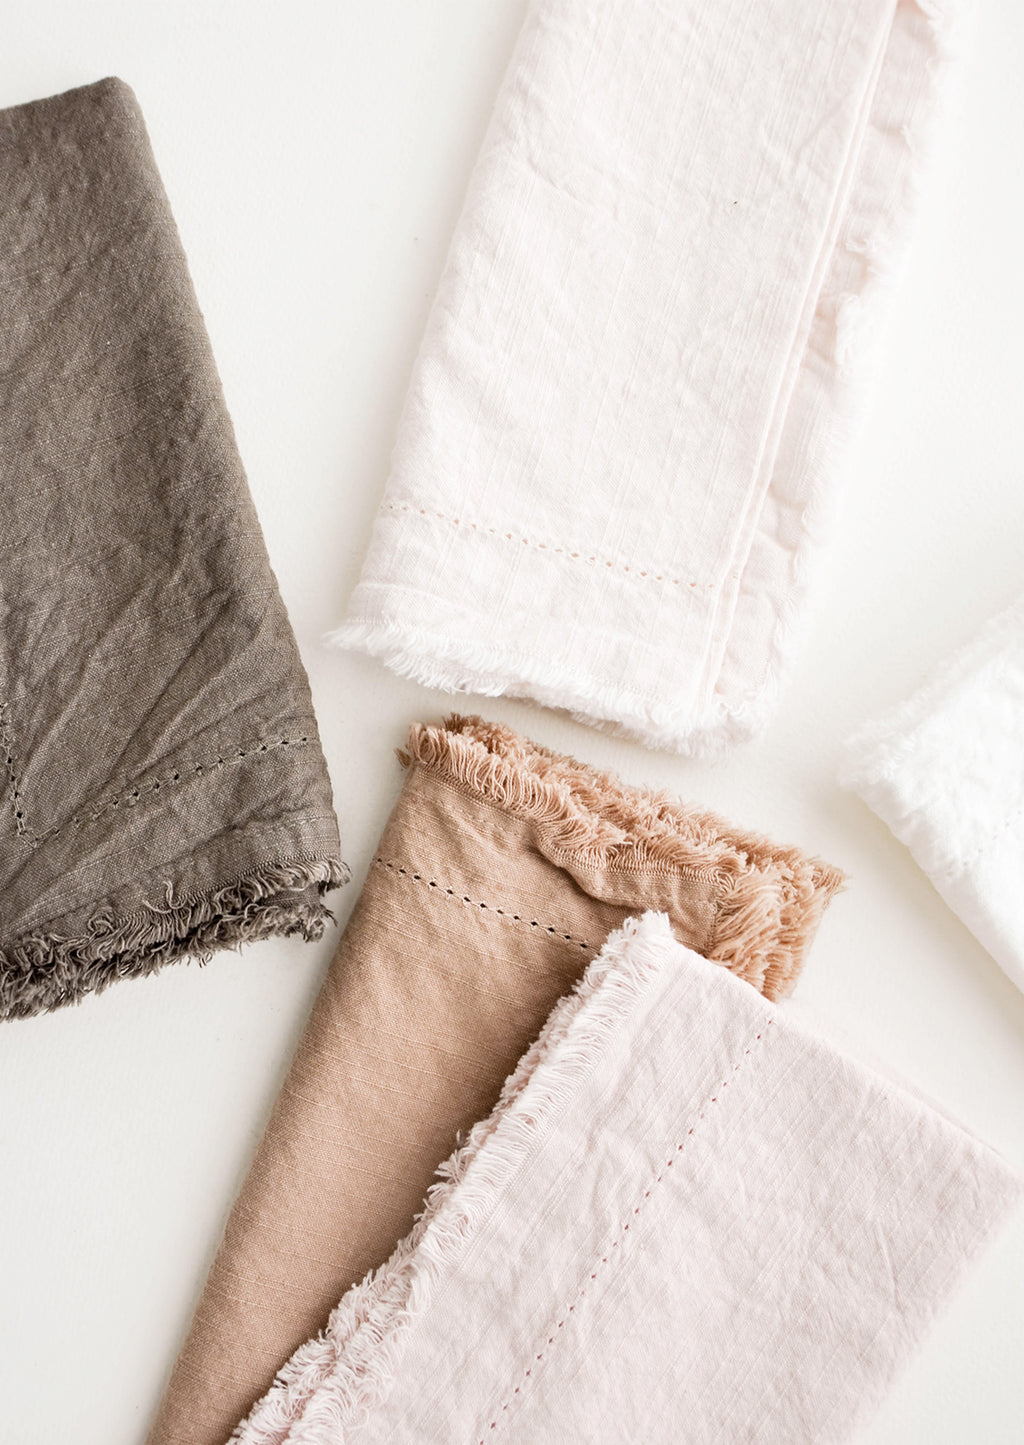 2:  Cotton Napkins with frayed edges in browns and pinks.